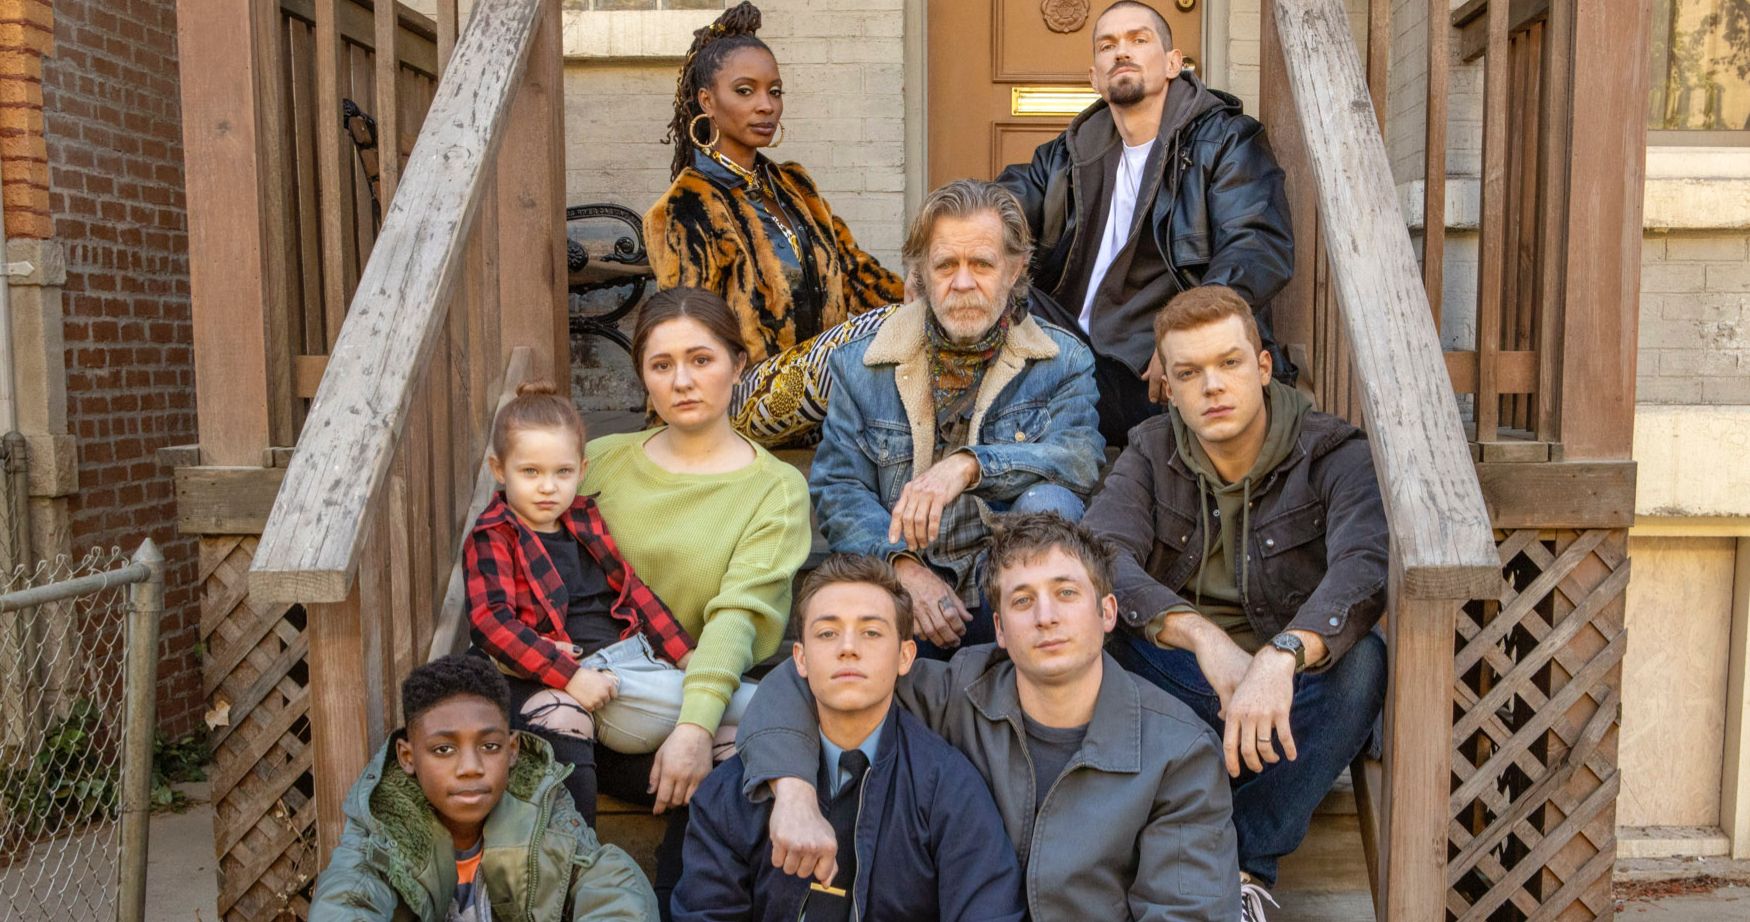 William H. Macy Joins Shameless Cast in Saying Goodbye to Fans After Series Finale